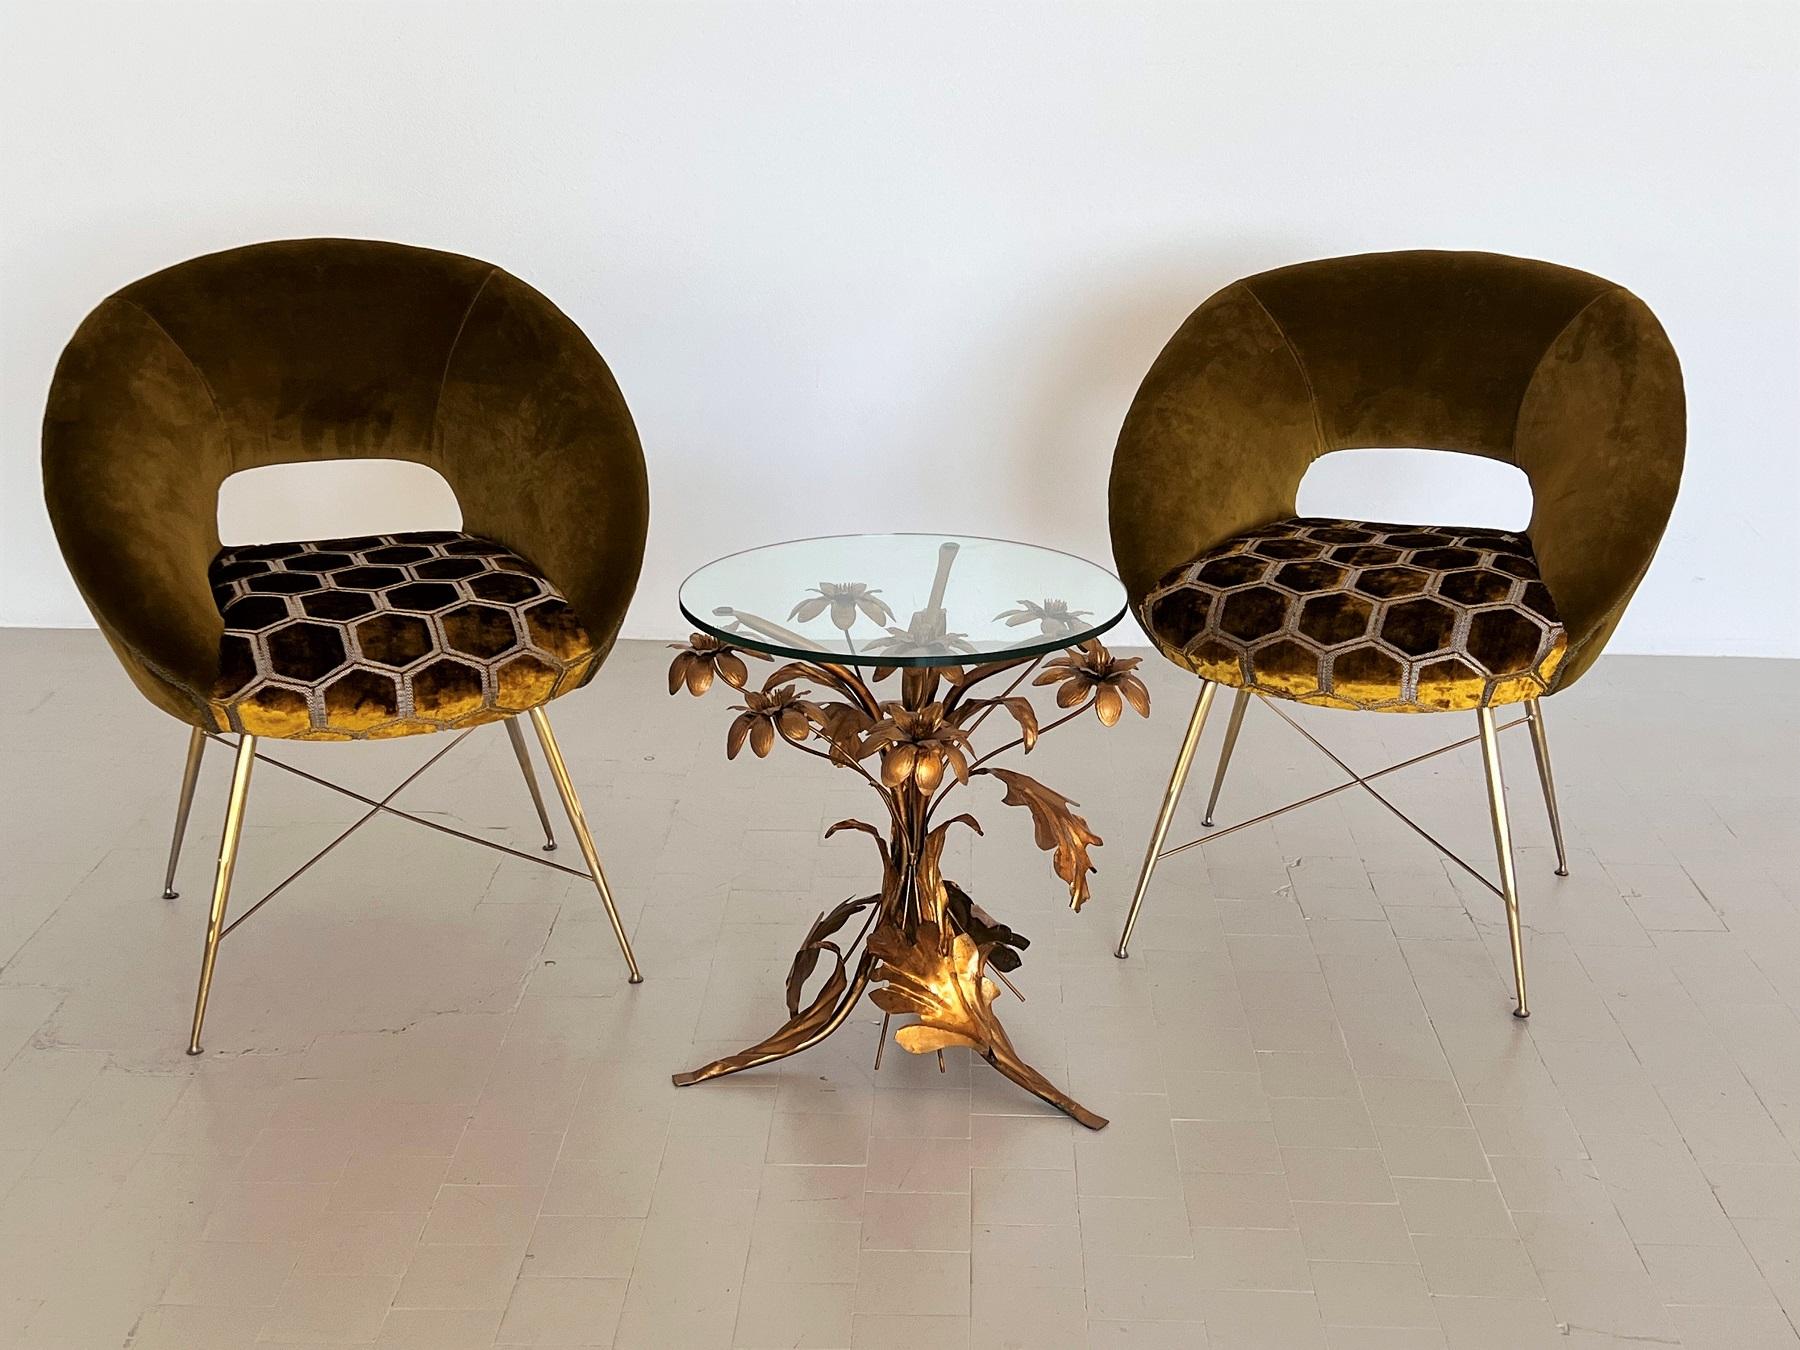 Silvio Cavatorta Pair of Chairs with Brass Legs Re-upholstered in Velvet, 1950s For Sale 5